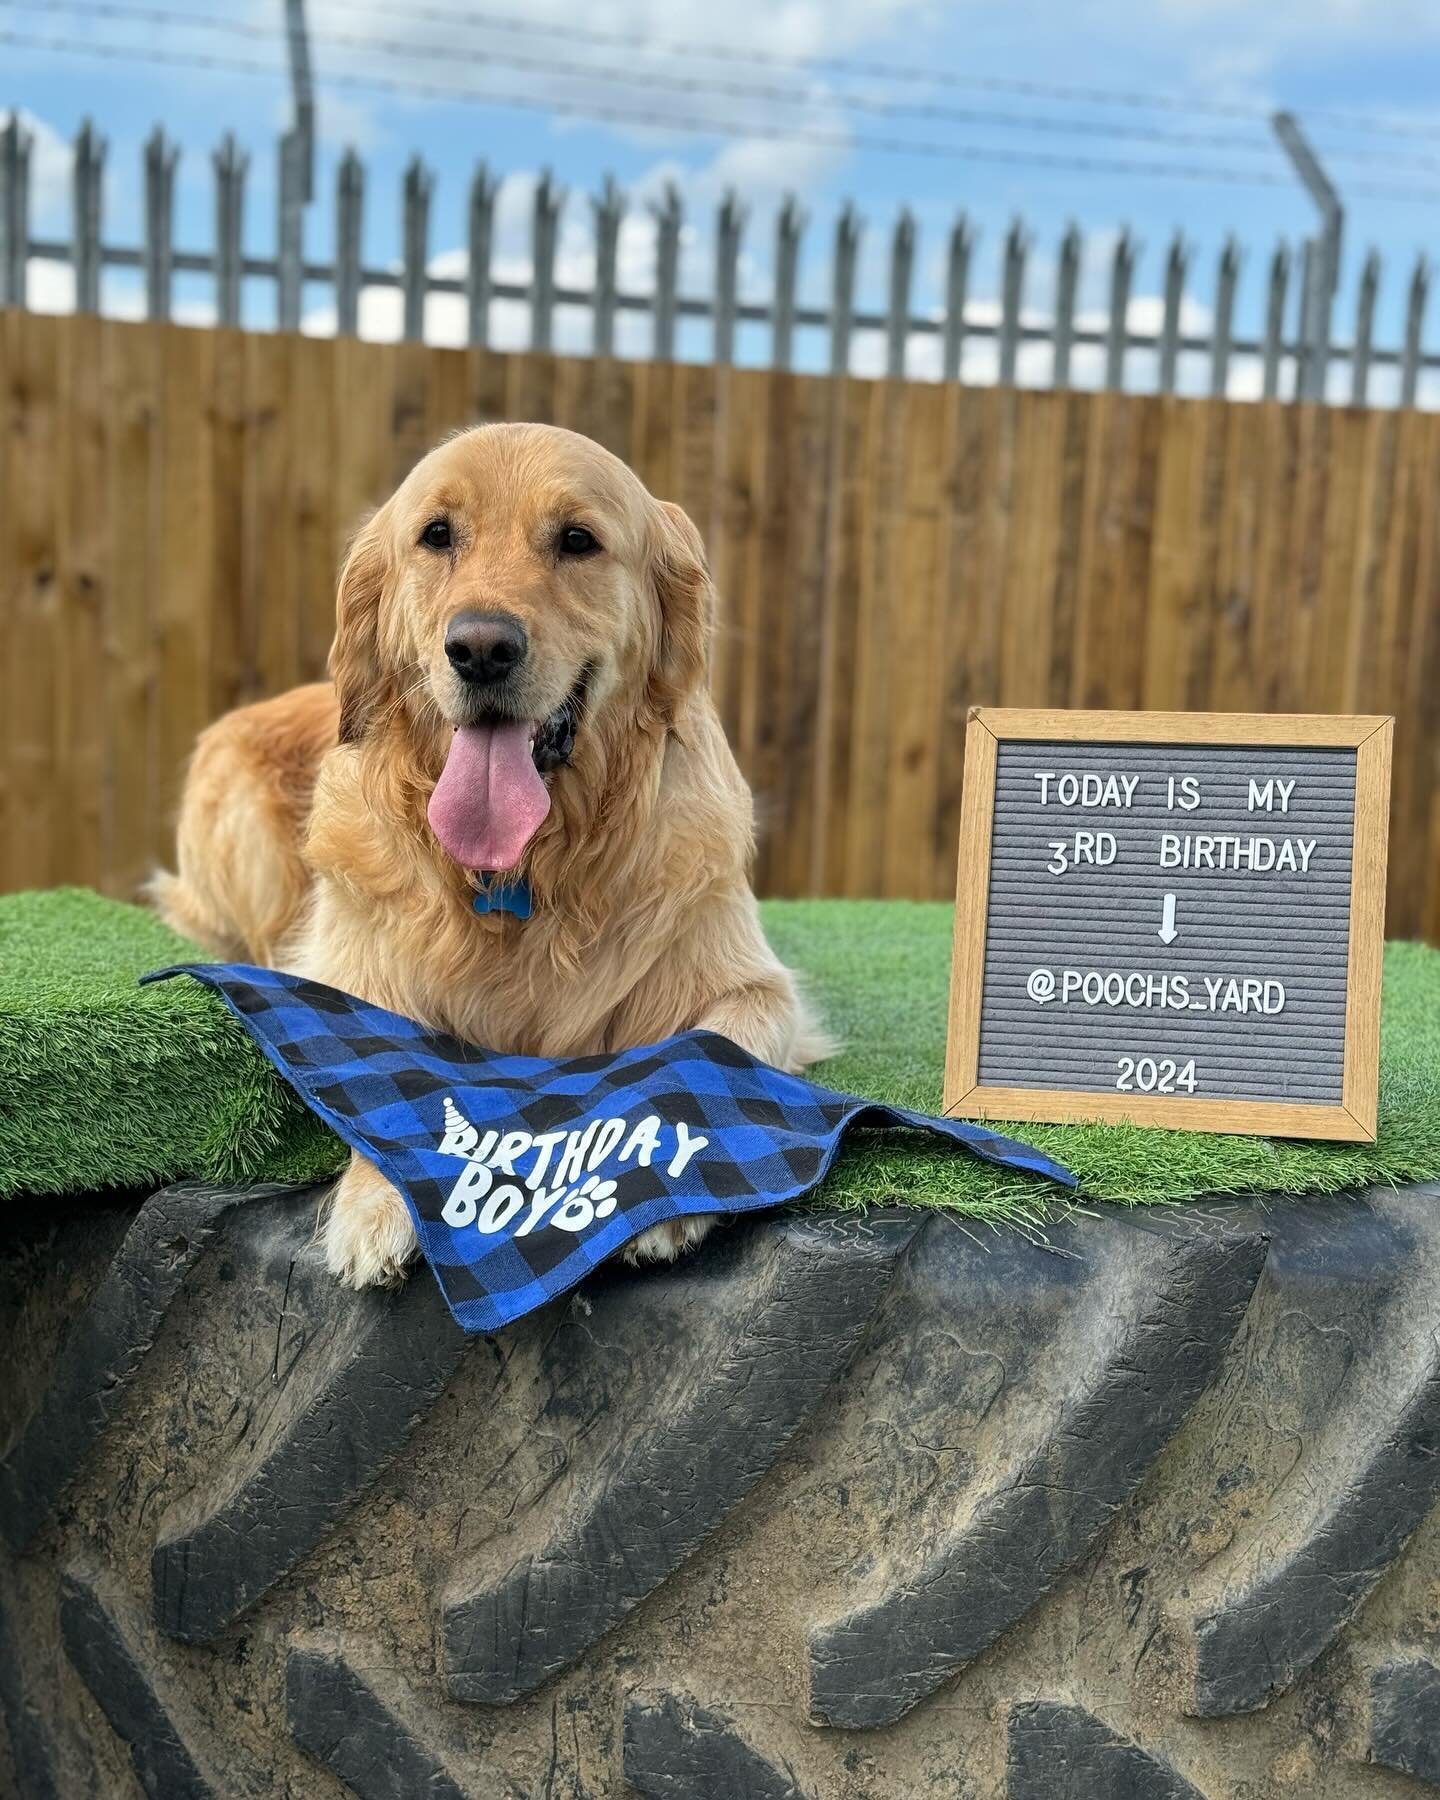 Birthday boy in the house! 🎁 
&mdash;
Wilson is turning 3 today! We haven&rsquo;t known Wilson long but have enjoyed everyday he&rsquo;s been with us. He must have told all his golden pals as we have had lots of golden retrievers in today, and Wilso